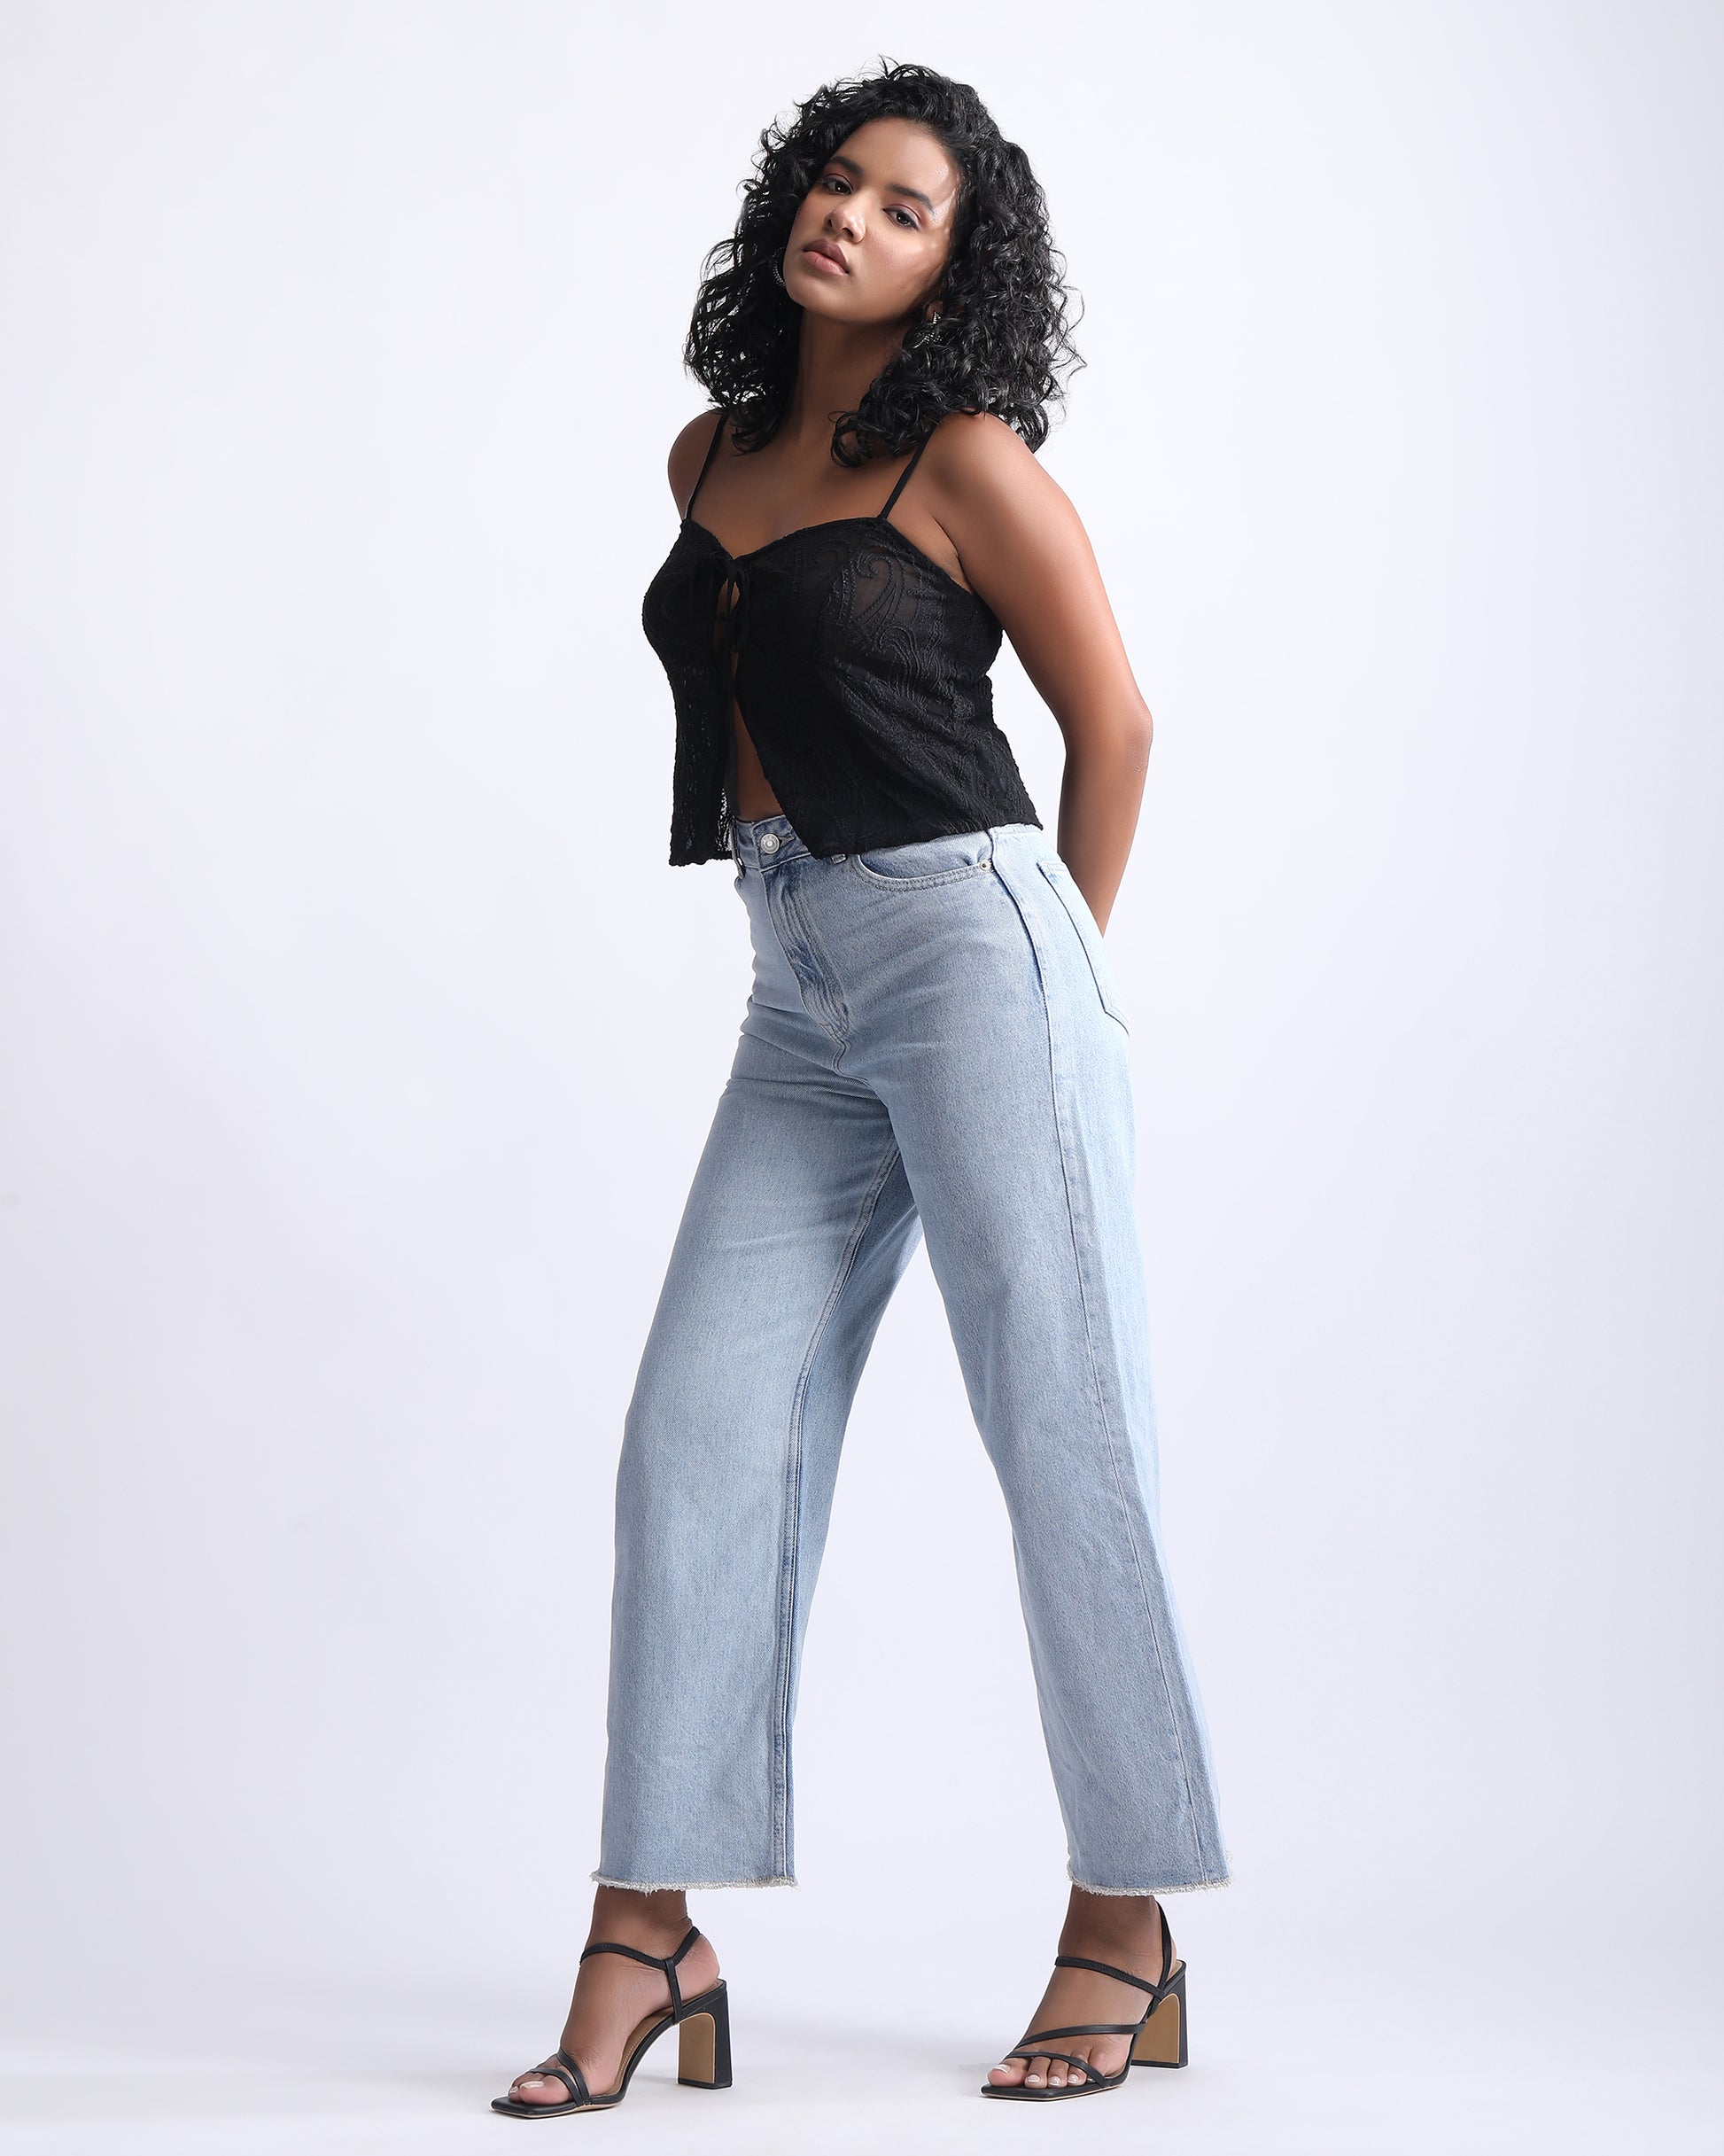 WIDE LEG BLUE JEANS,blue, bottomwear, denim, frayed hem, full length, high rise, high waist, icy blue, jeans, light blue, washed jeans, wide leg,wide-leg-blue-jeans,Length - Full length Waist - High-rise waist Fit - Wide leg fit Color - BlueNo. of Pockets - 4Material - DenimLength - 40 inchClosure - Zip &amp; buttonDetail - Washed effect